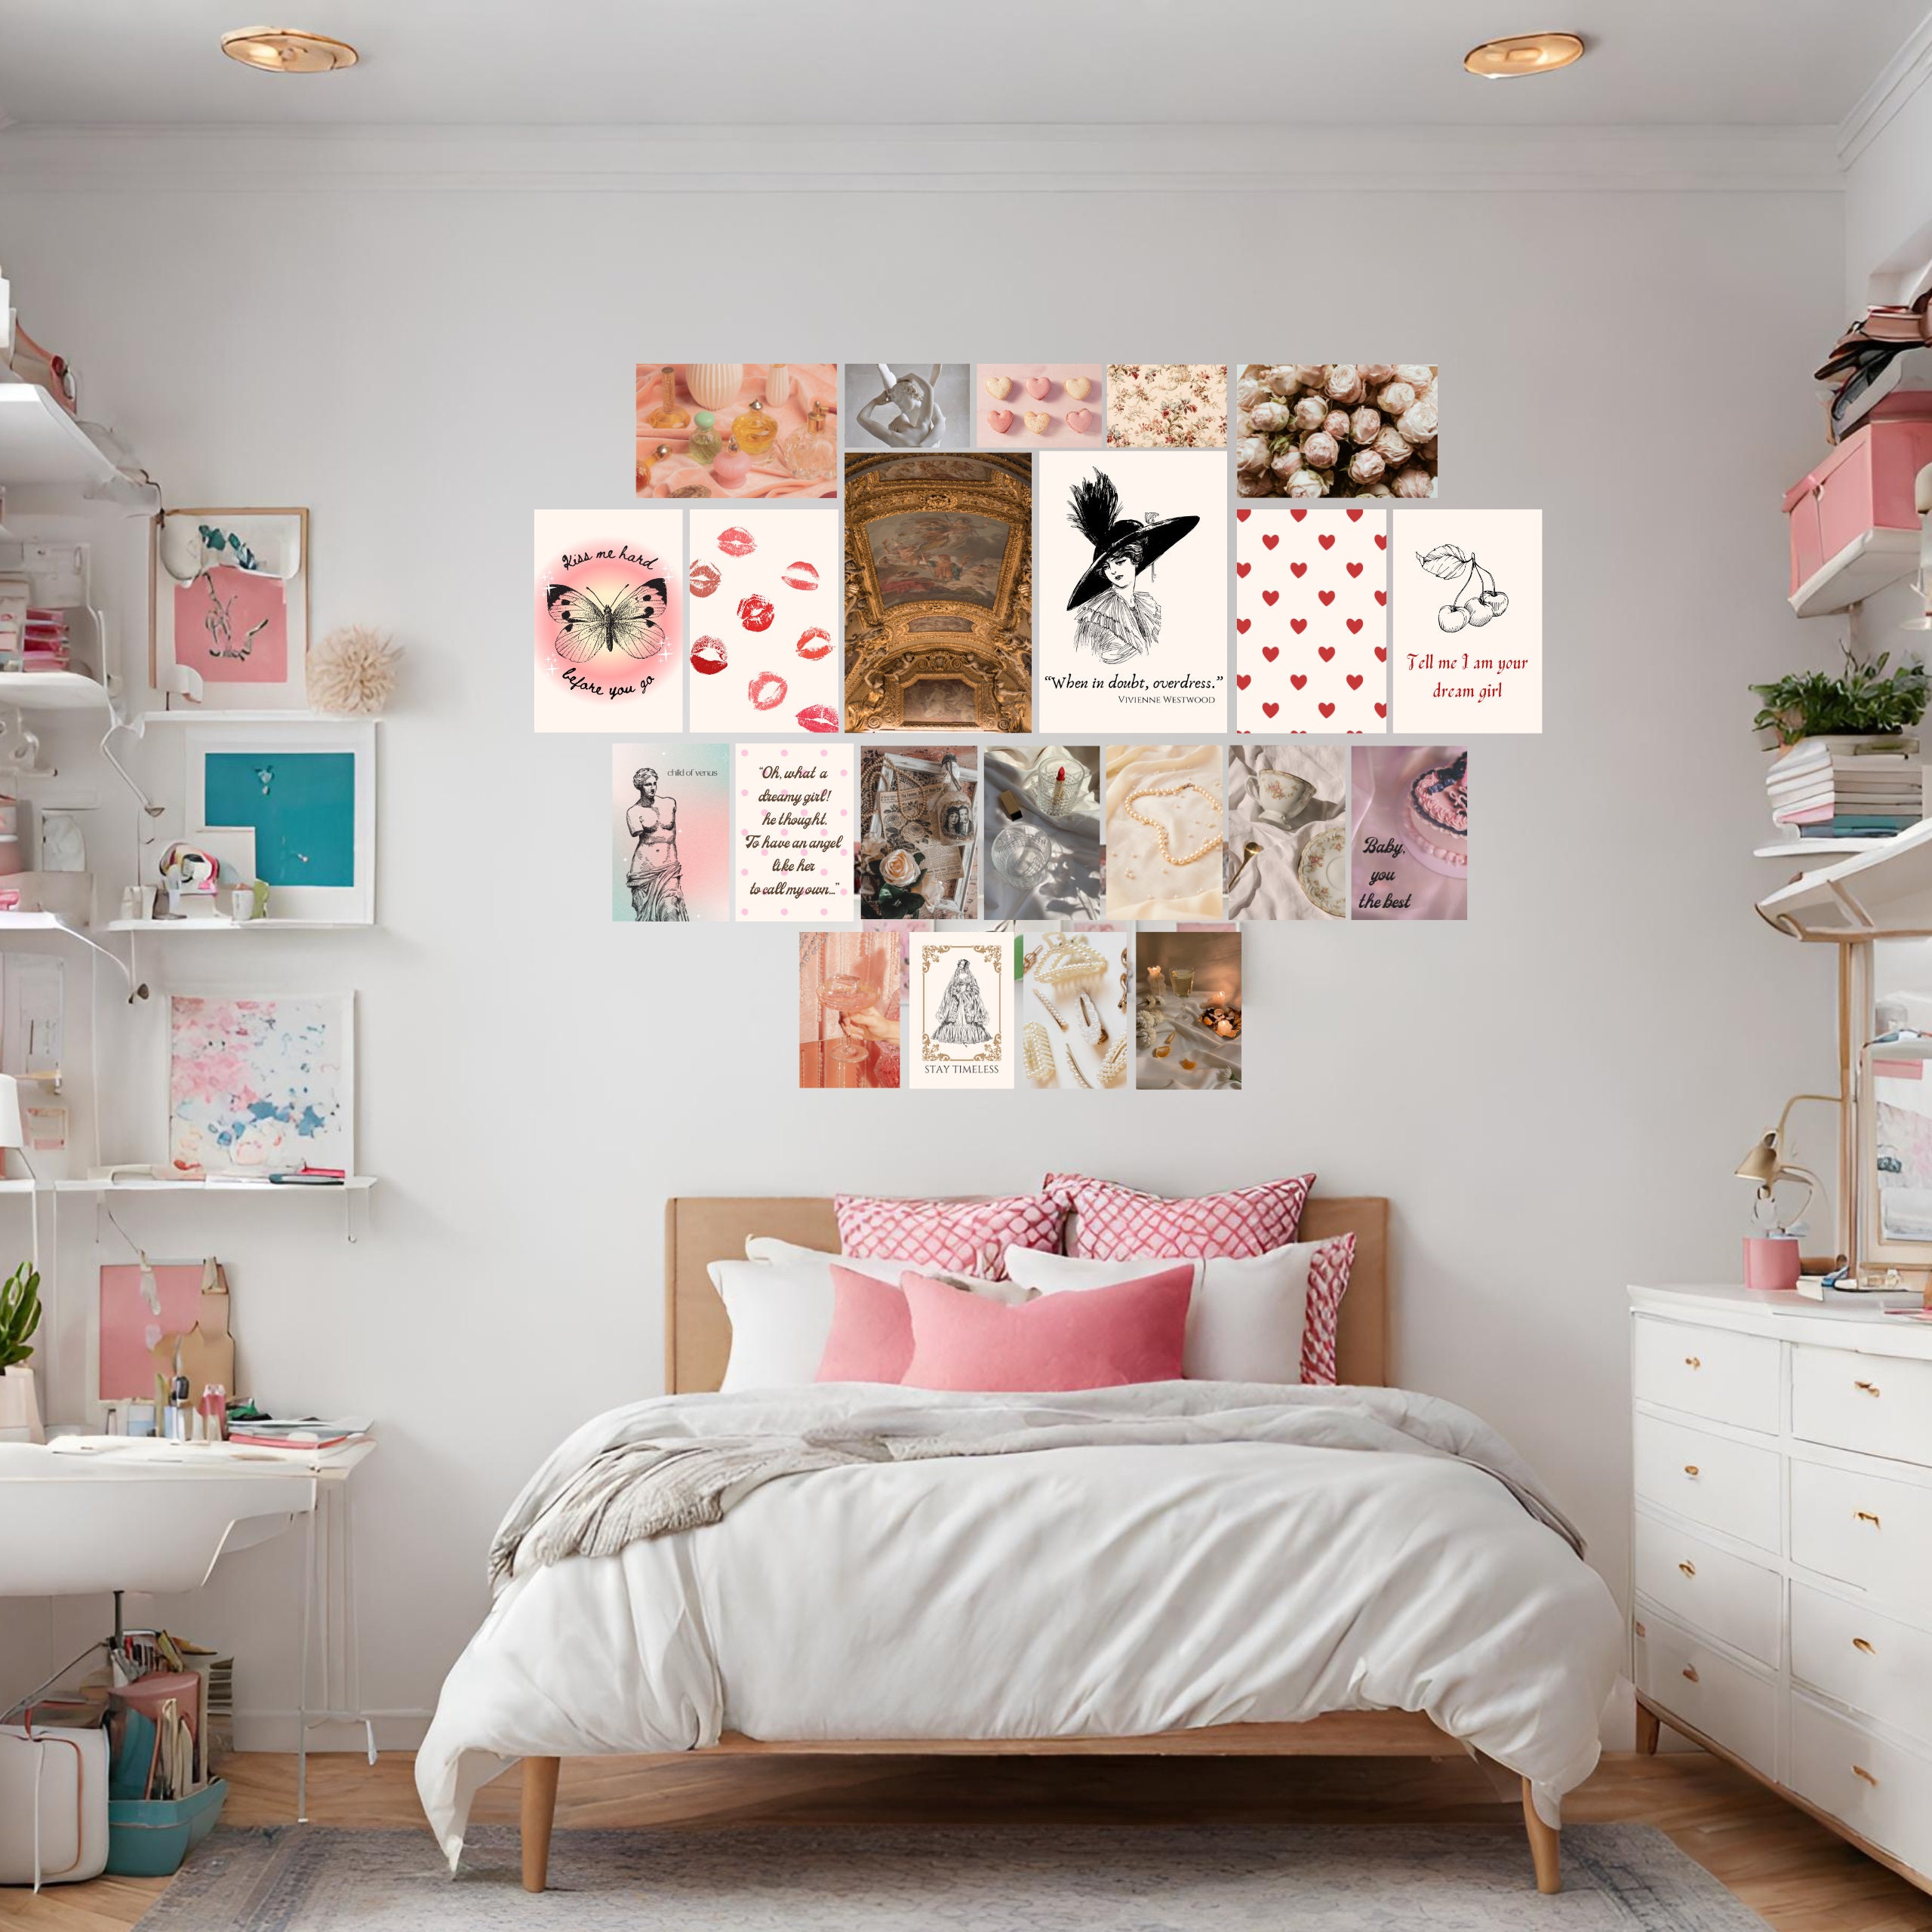 10 Coquette Room Decor Ideas for a Chic and Feminine Space — Lord Decor